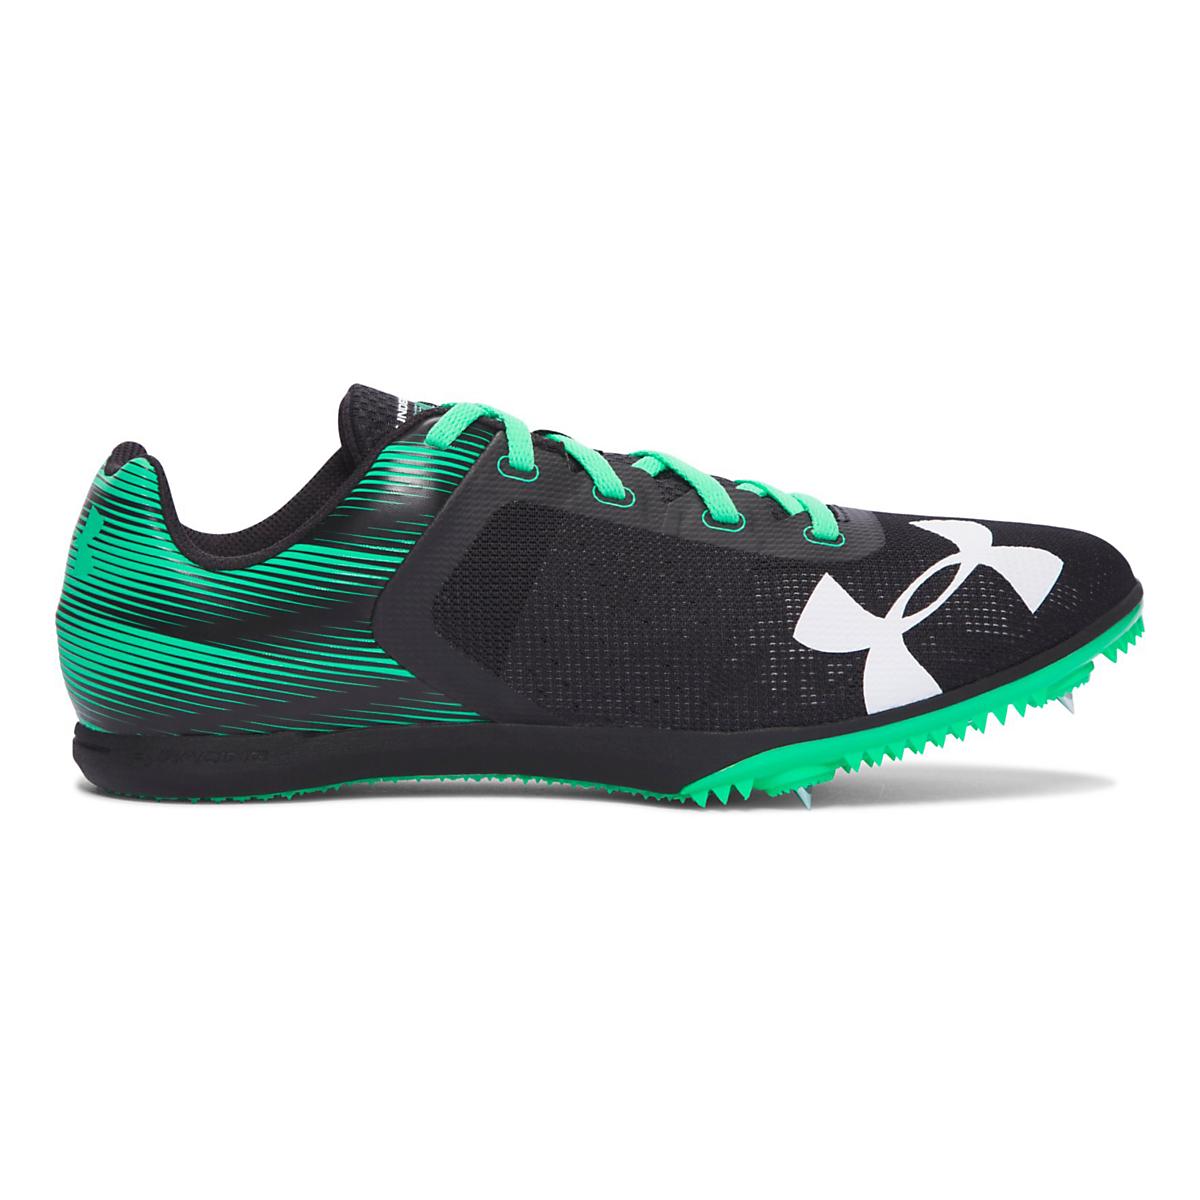 Mens Under Armour Kick Distance Spike Track and Field Shoe at Road